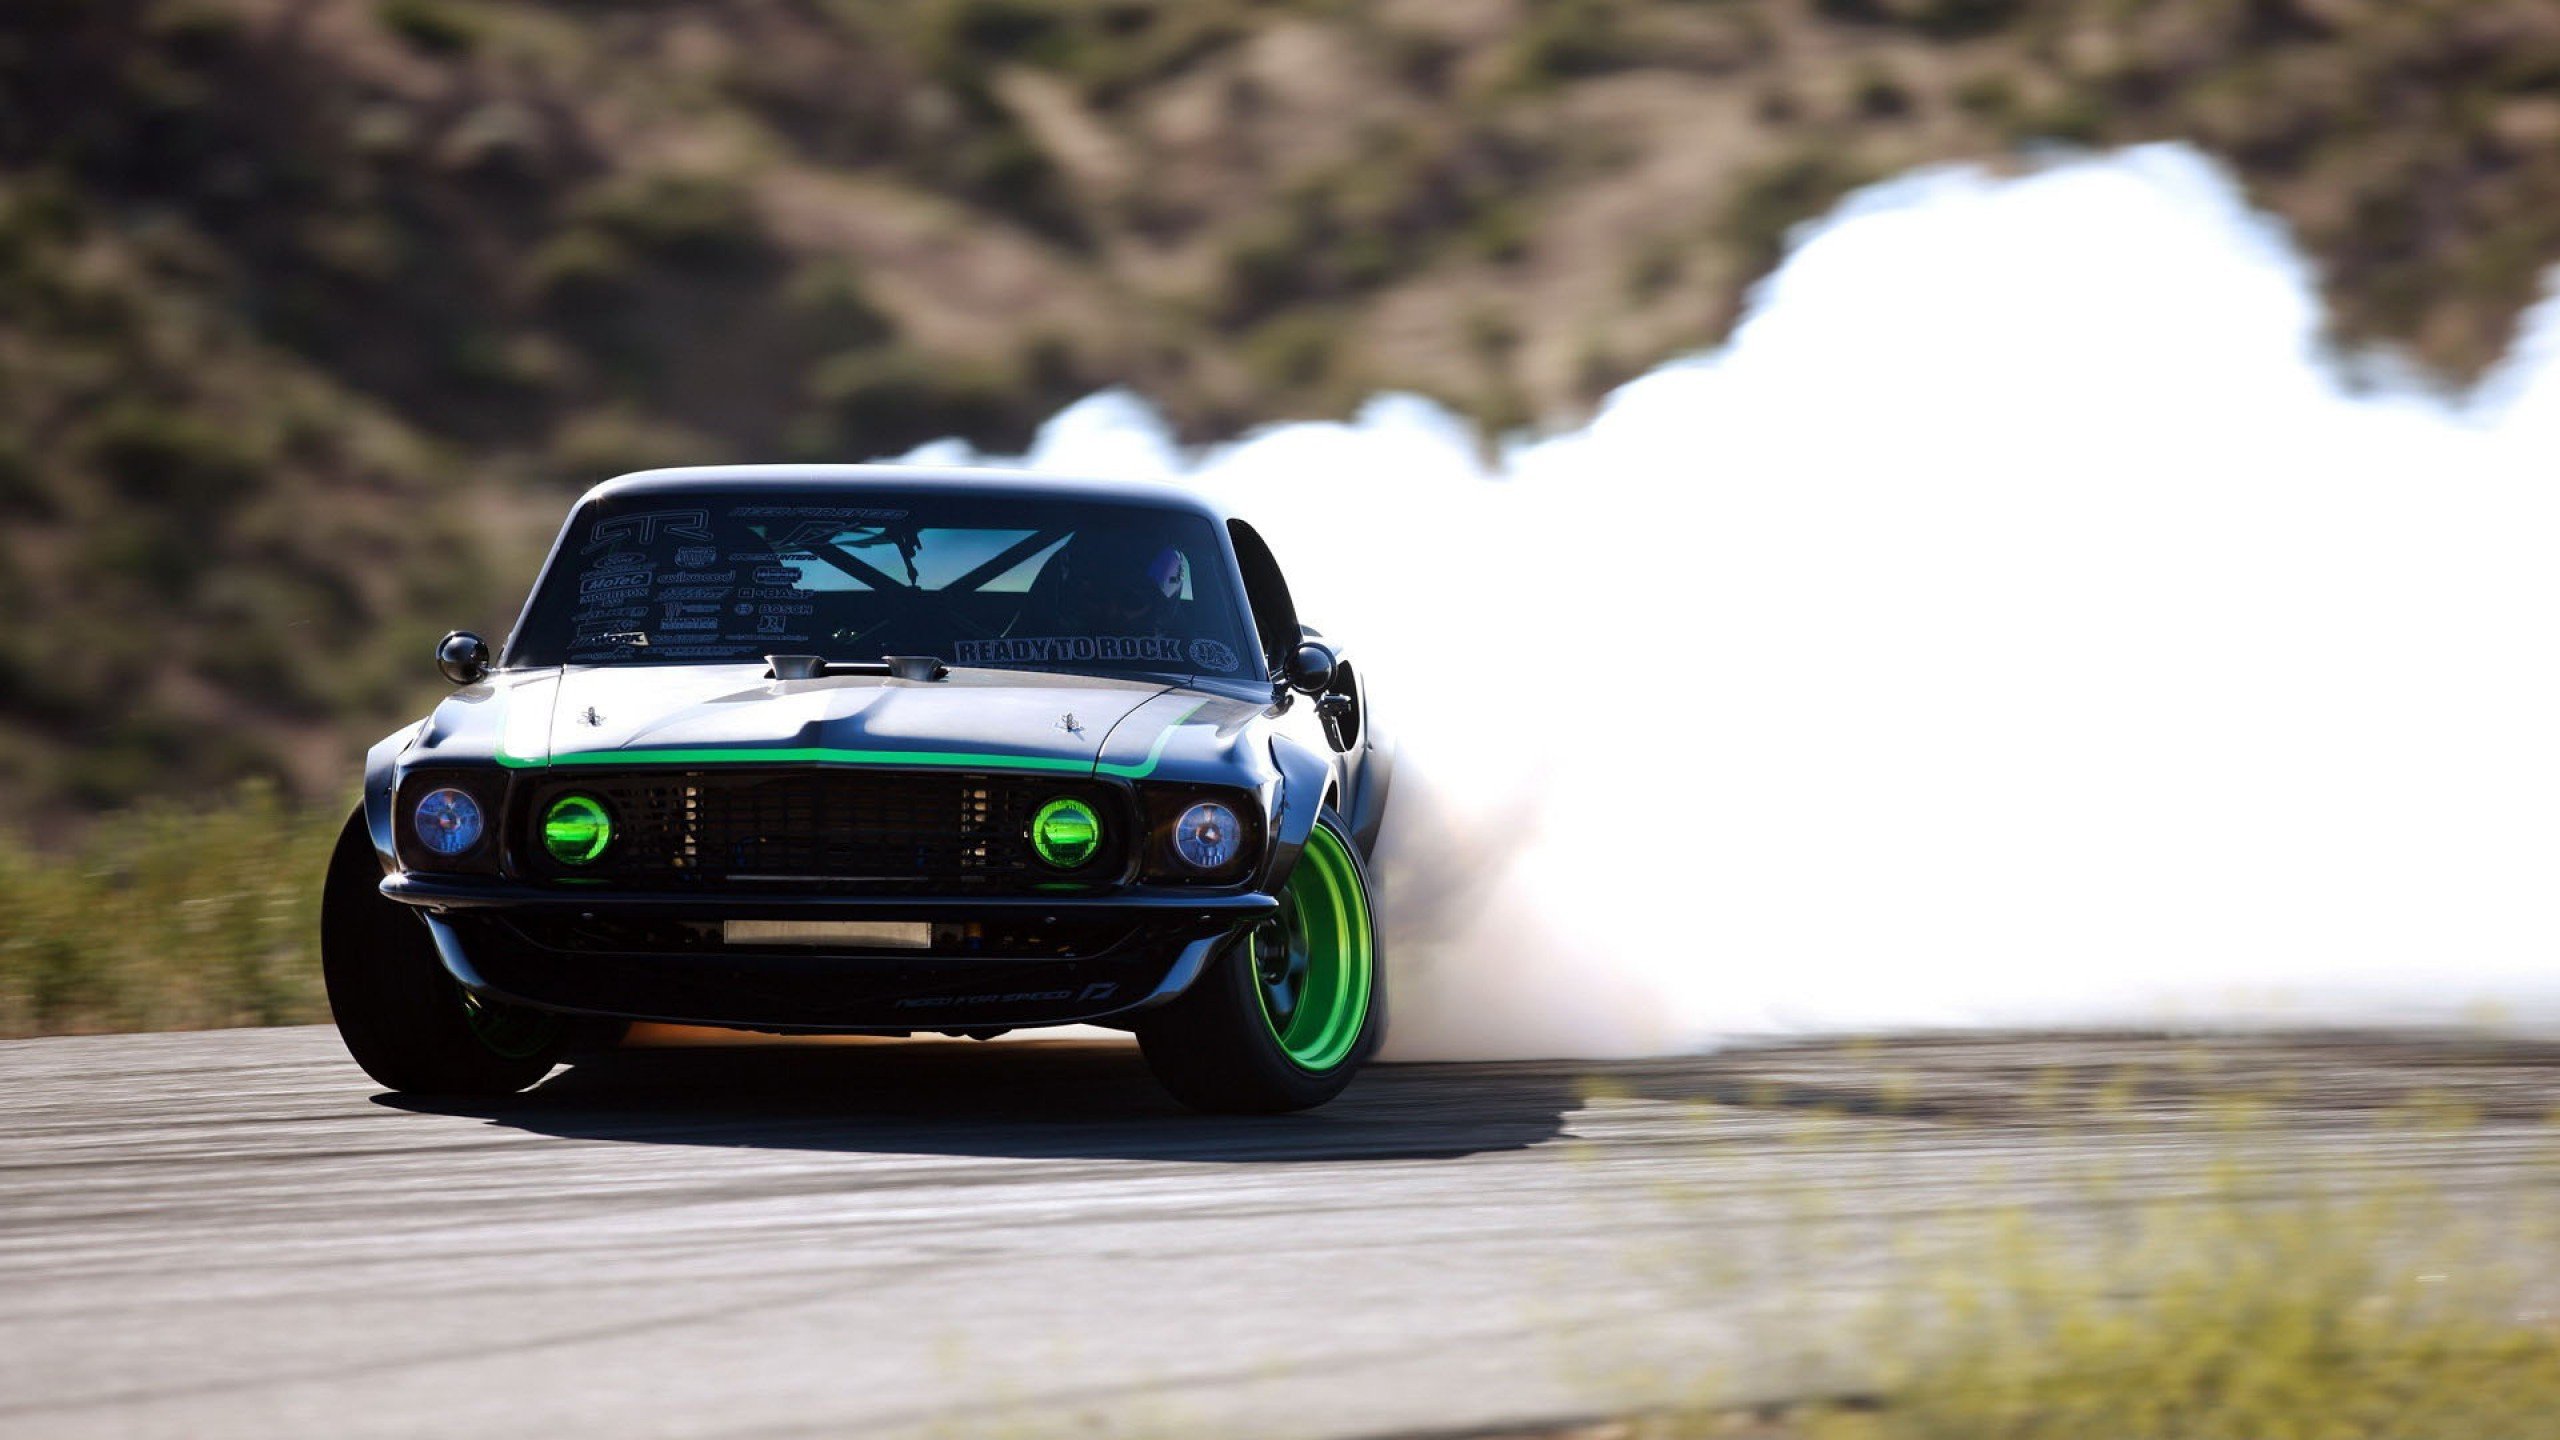 1969, Ford, Mustang, Rtr x, Drift, Race, Racing, Hot, Rod, Rods, Muscle, Classic, Need, Speed, Rtr Wallpaper